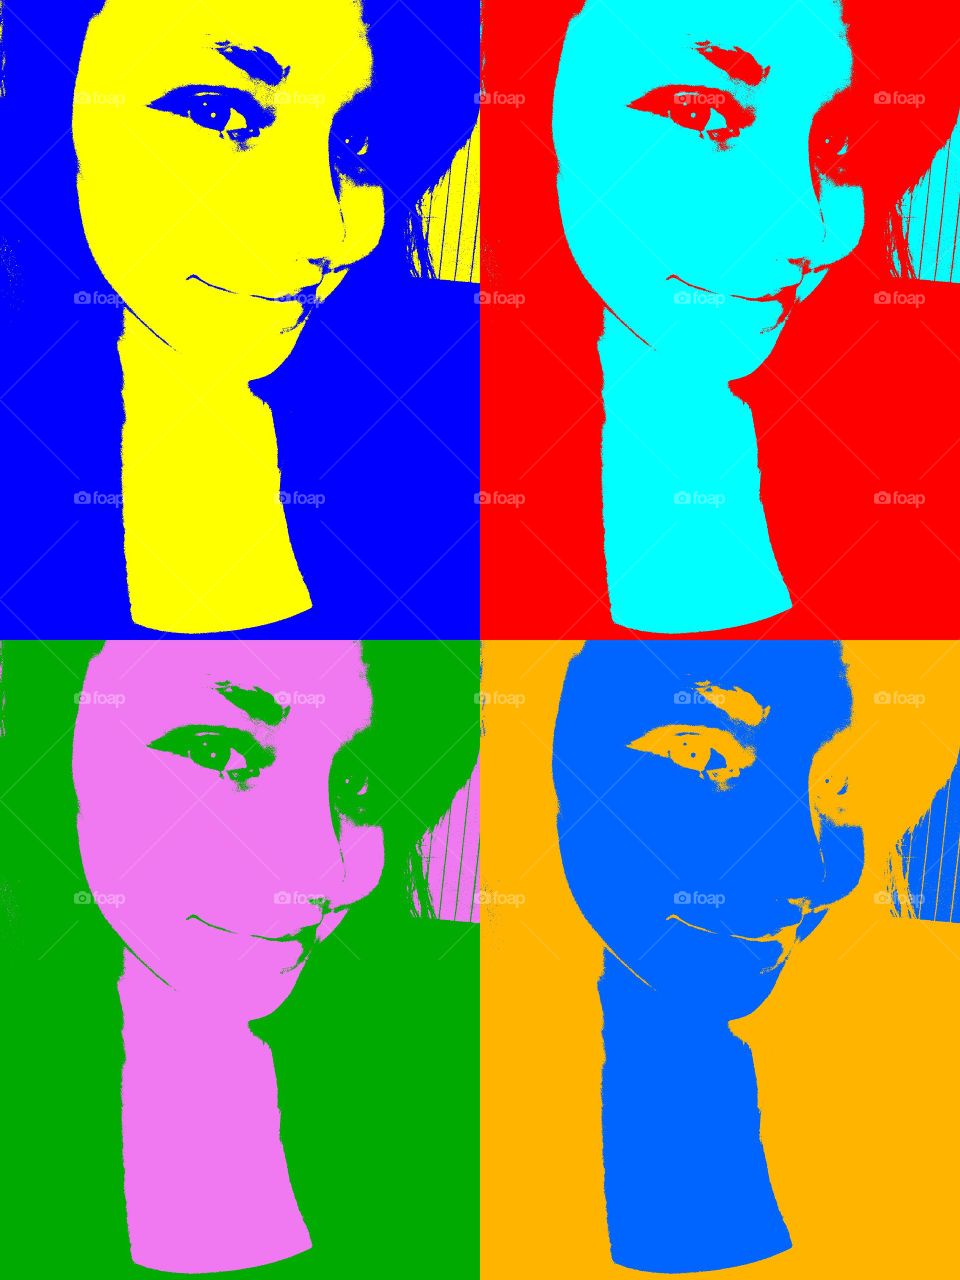 A series on pop-art ; a creative approach to color popping portraits. Filters, and a phone camera.